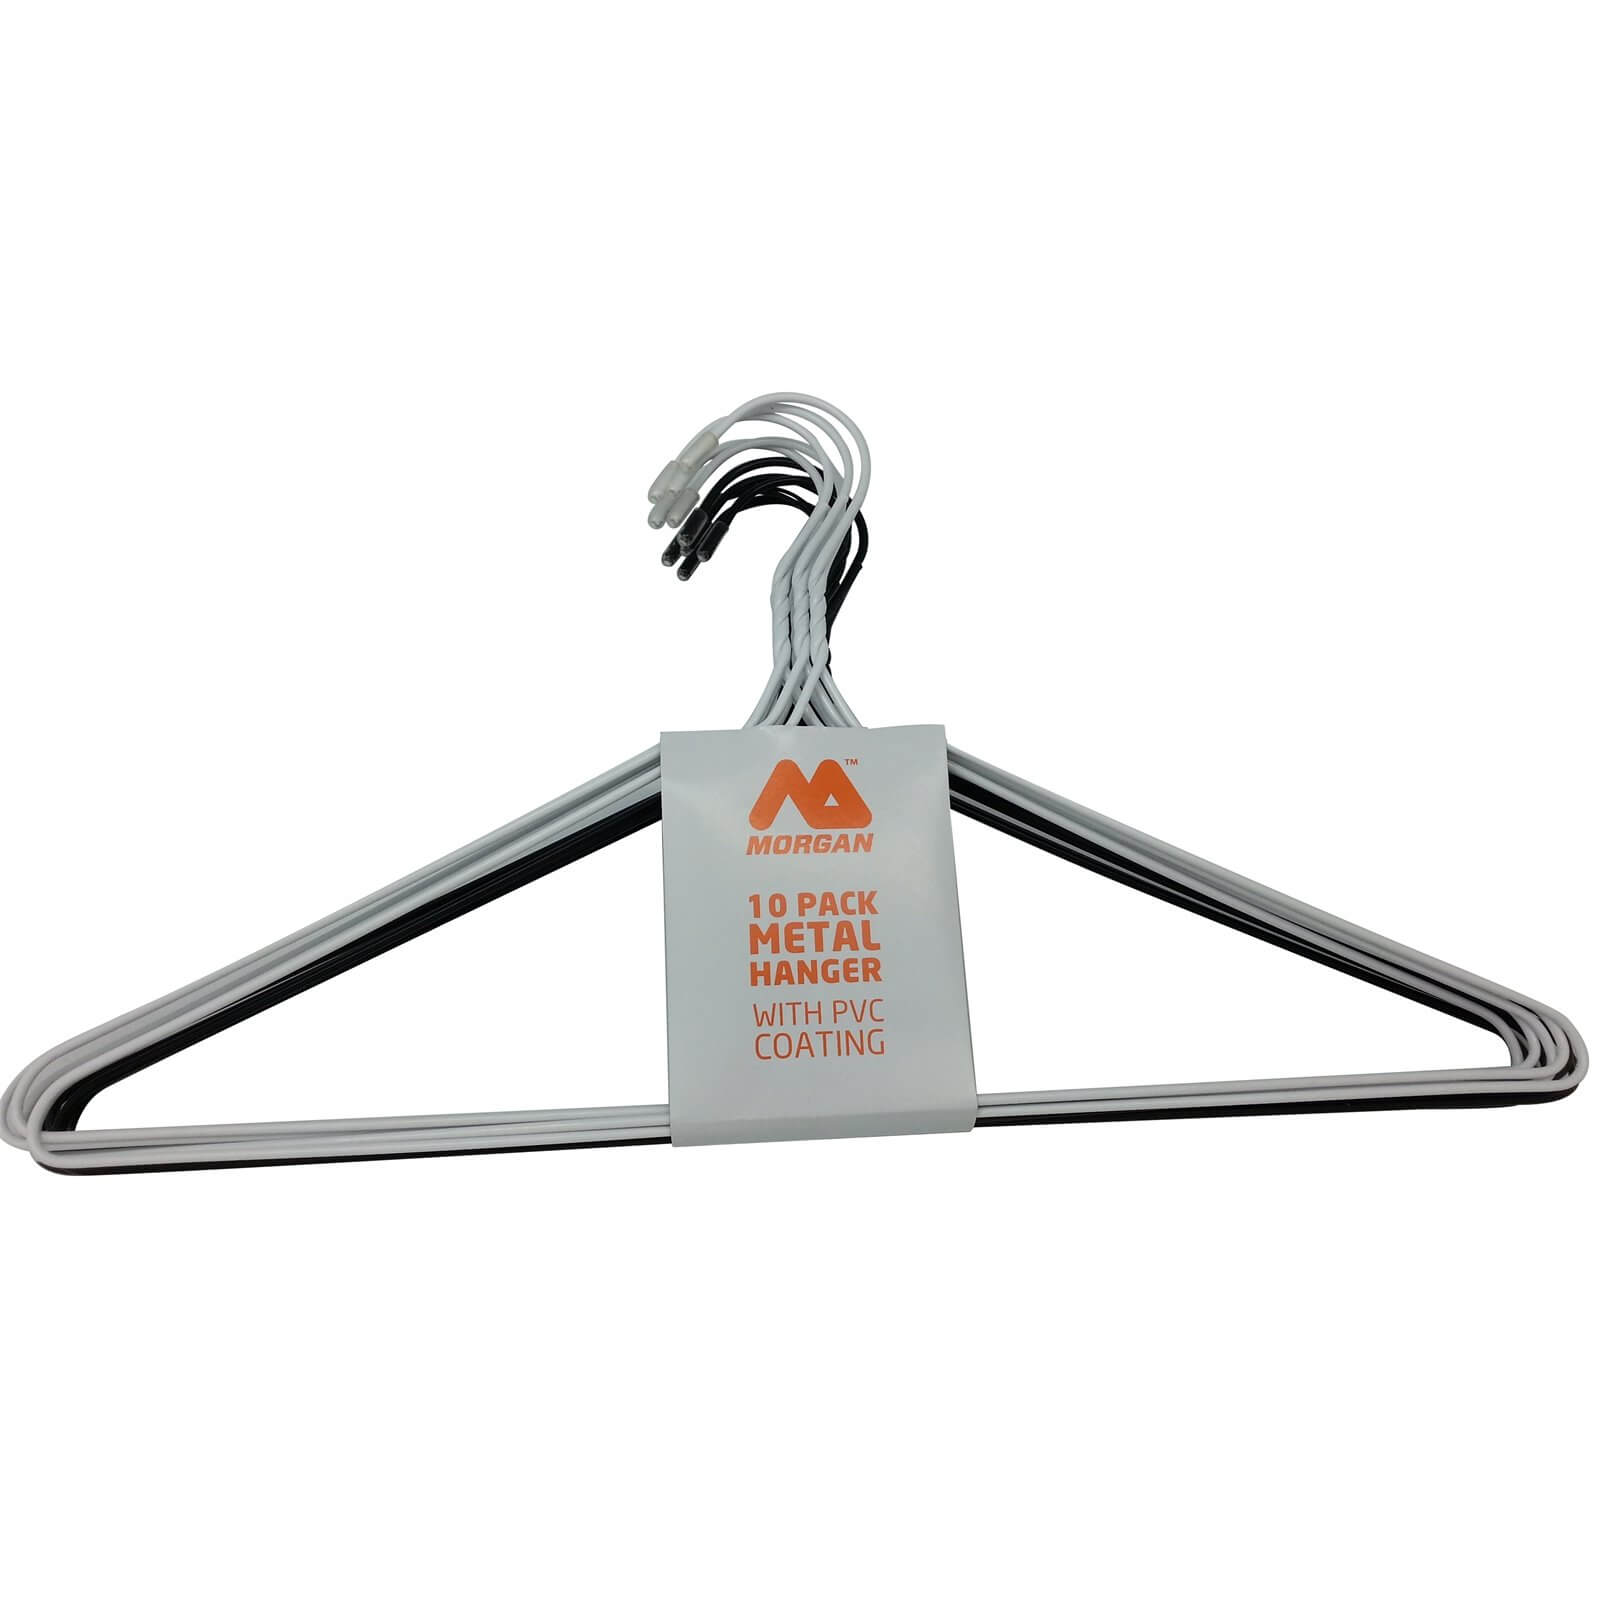 Metal Clothes Hangers - 10 Pack